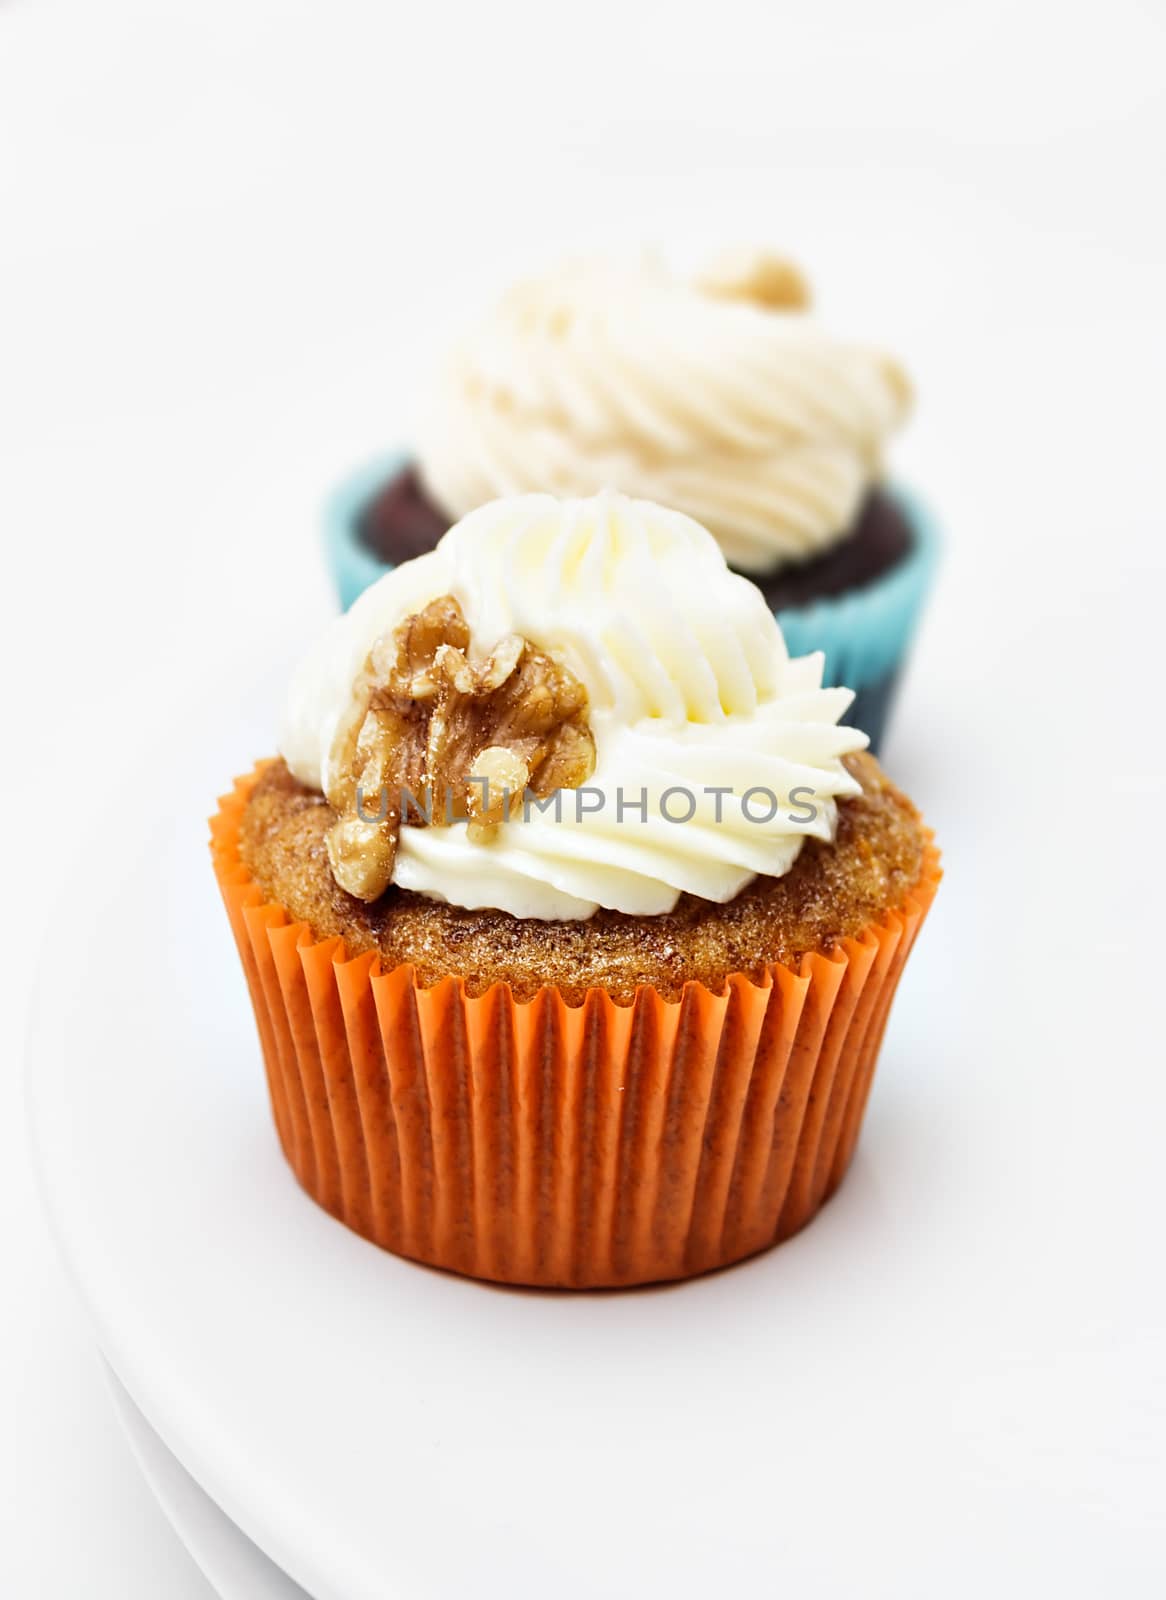 Cupcake with walnuts cream on white background. Vertical image.